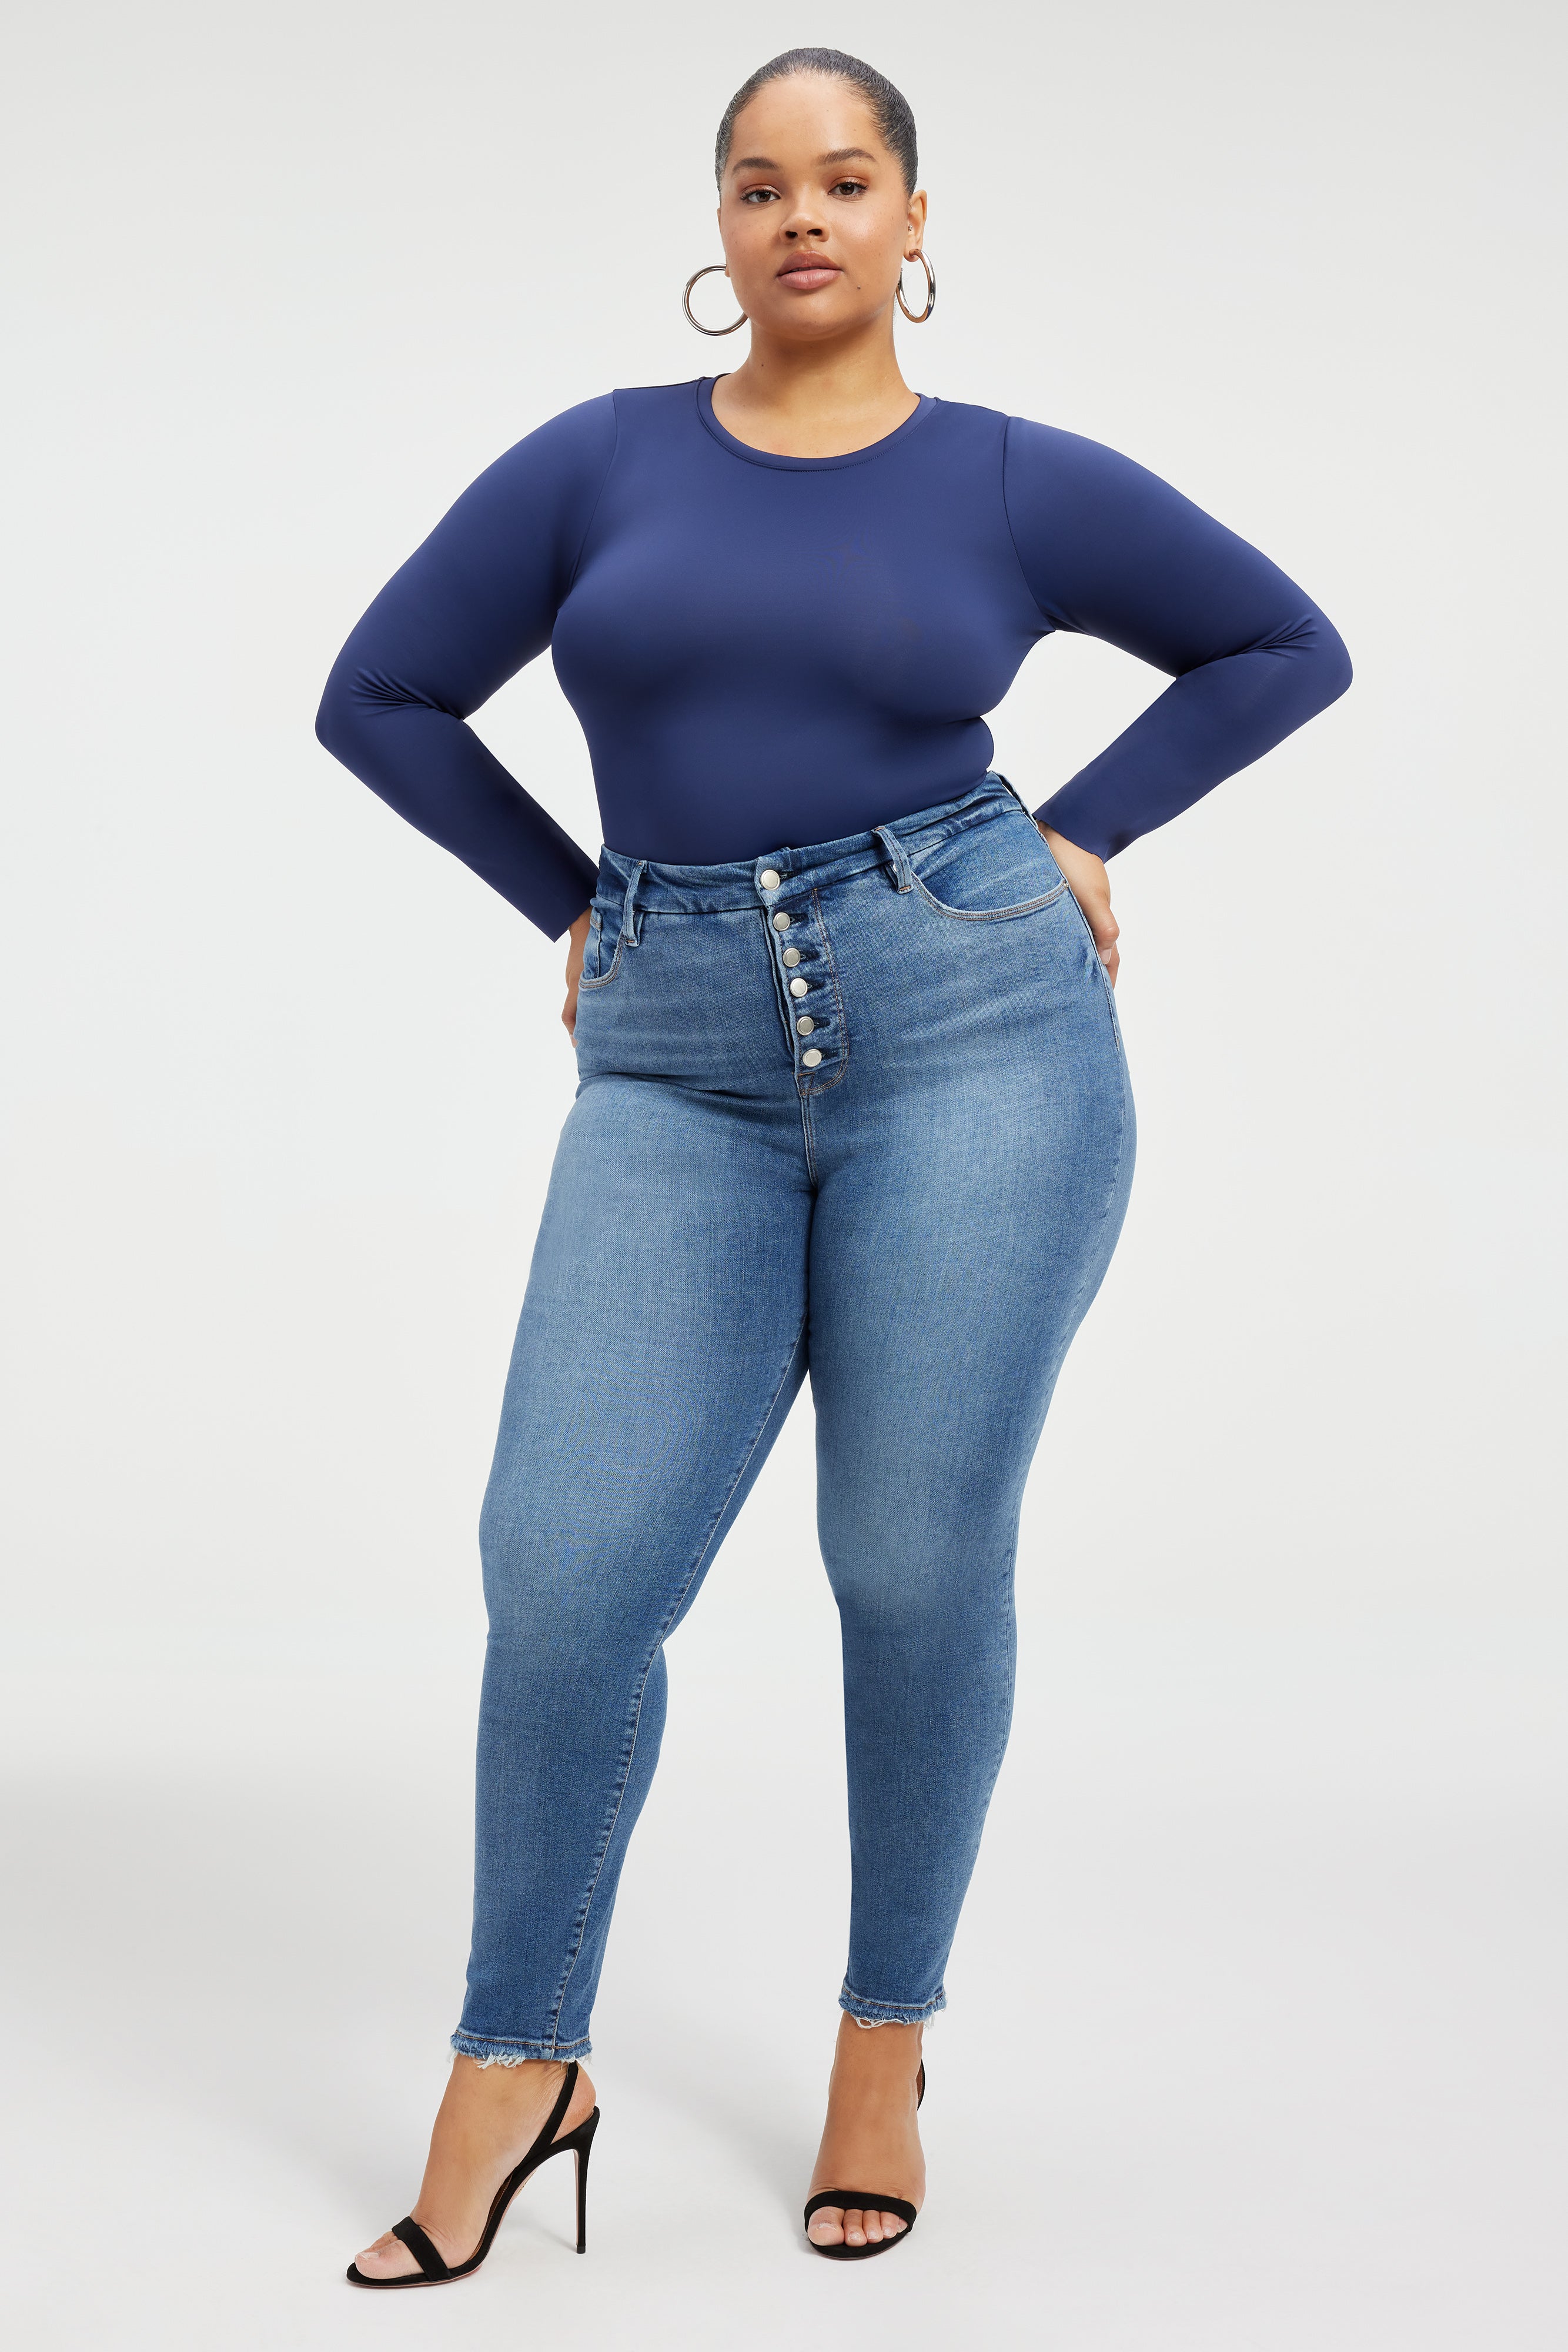 The 24 Best Curvy Jeans for Women That Fit So Well